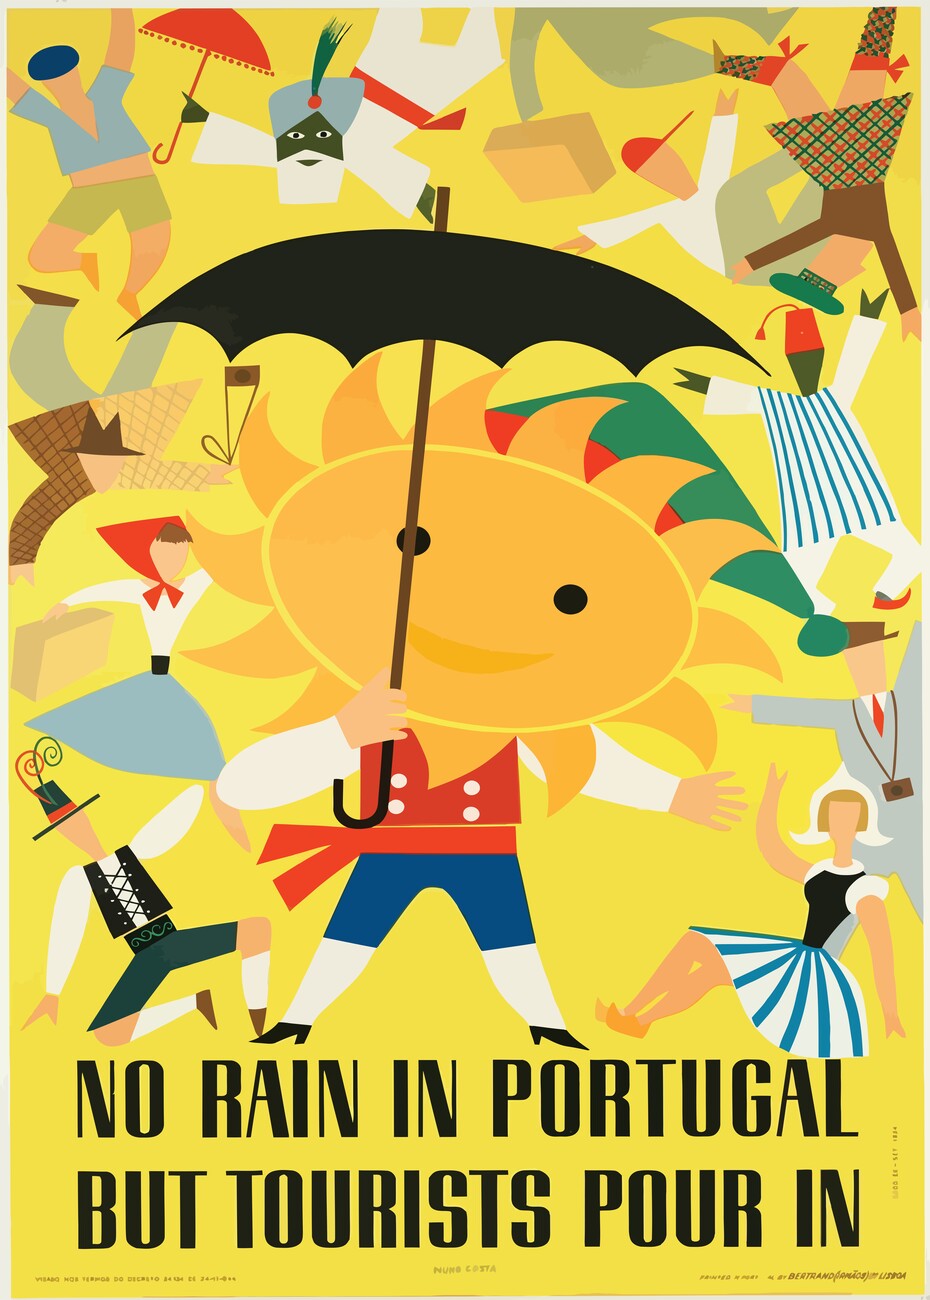 Illustration No Rain in Portugal But Tourists Pour In